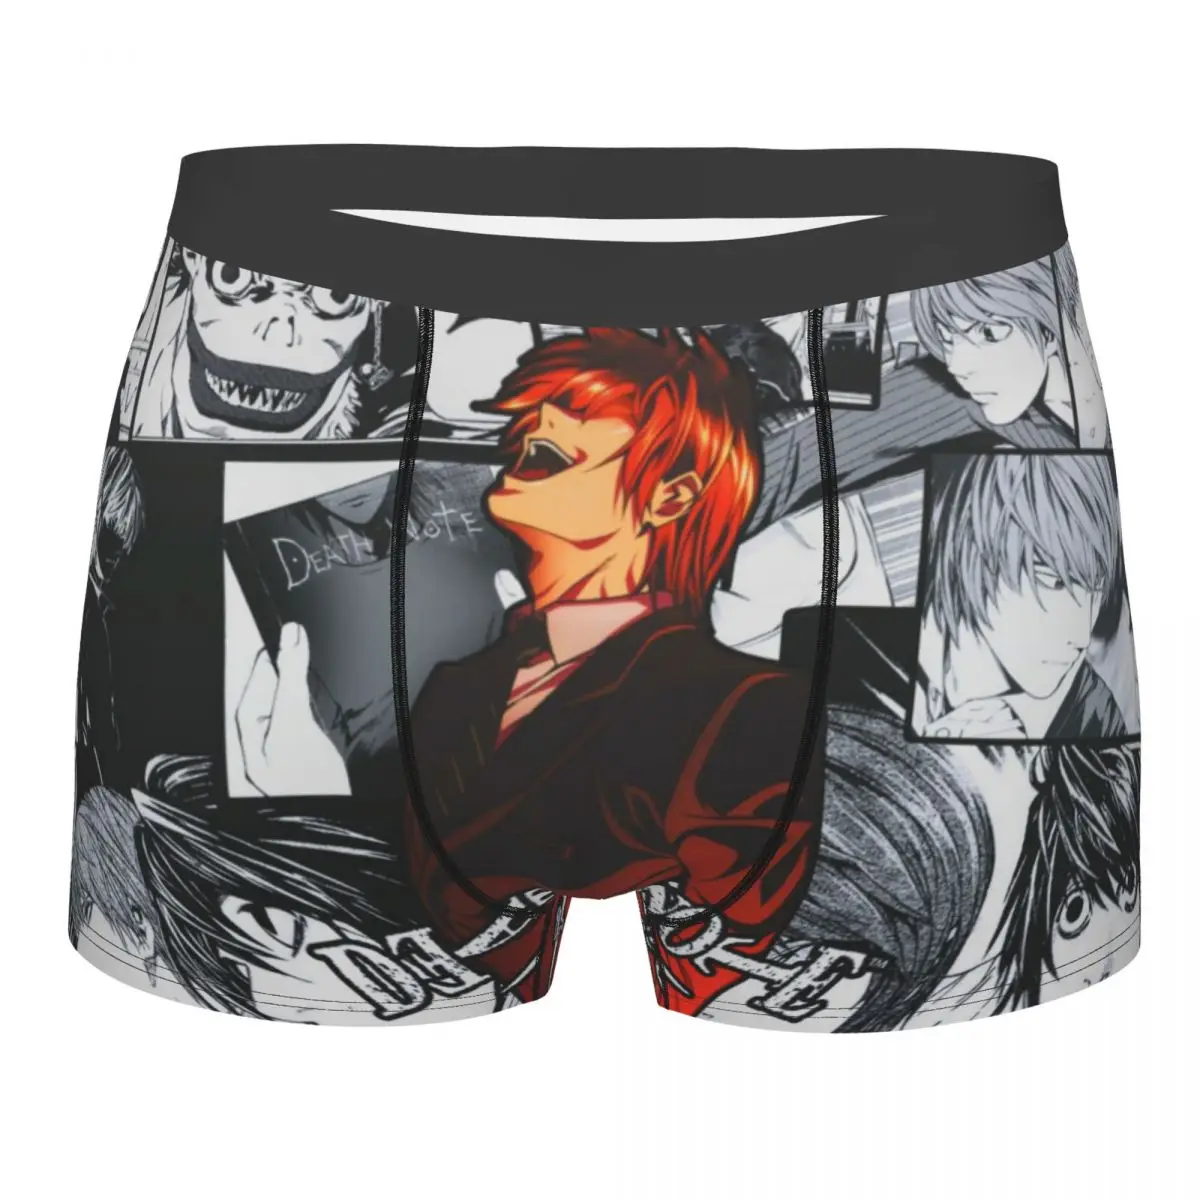 

Death Note Yagami Light Man's Boxer Briefs Manga Cut Highly Breathable Underwear Top Quality Print Shorts Gift Idea